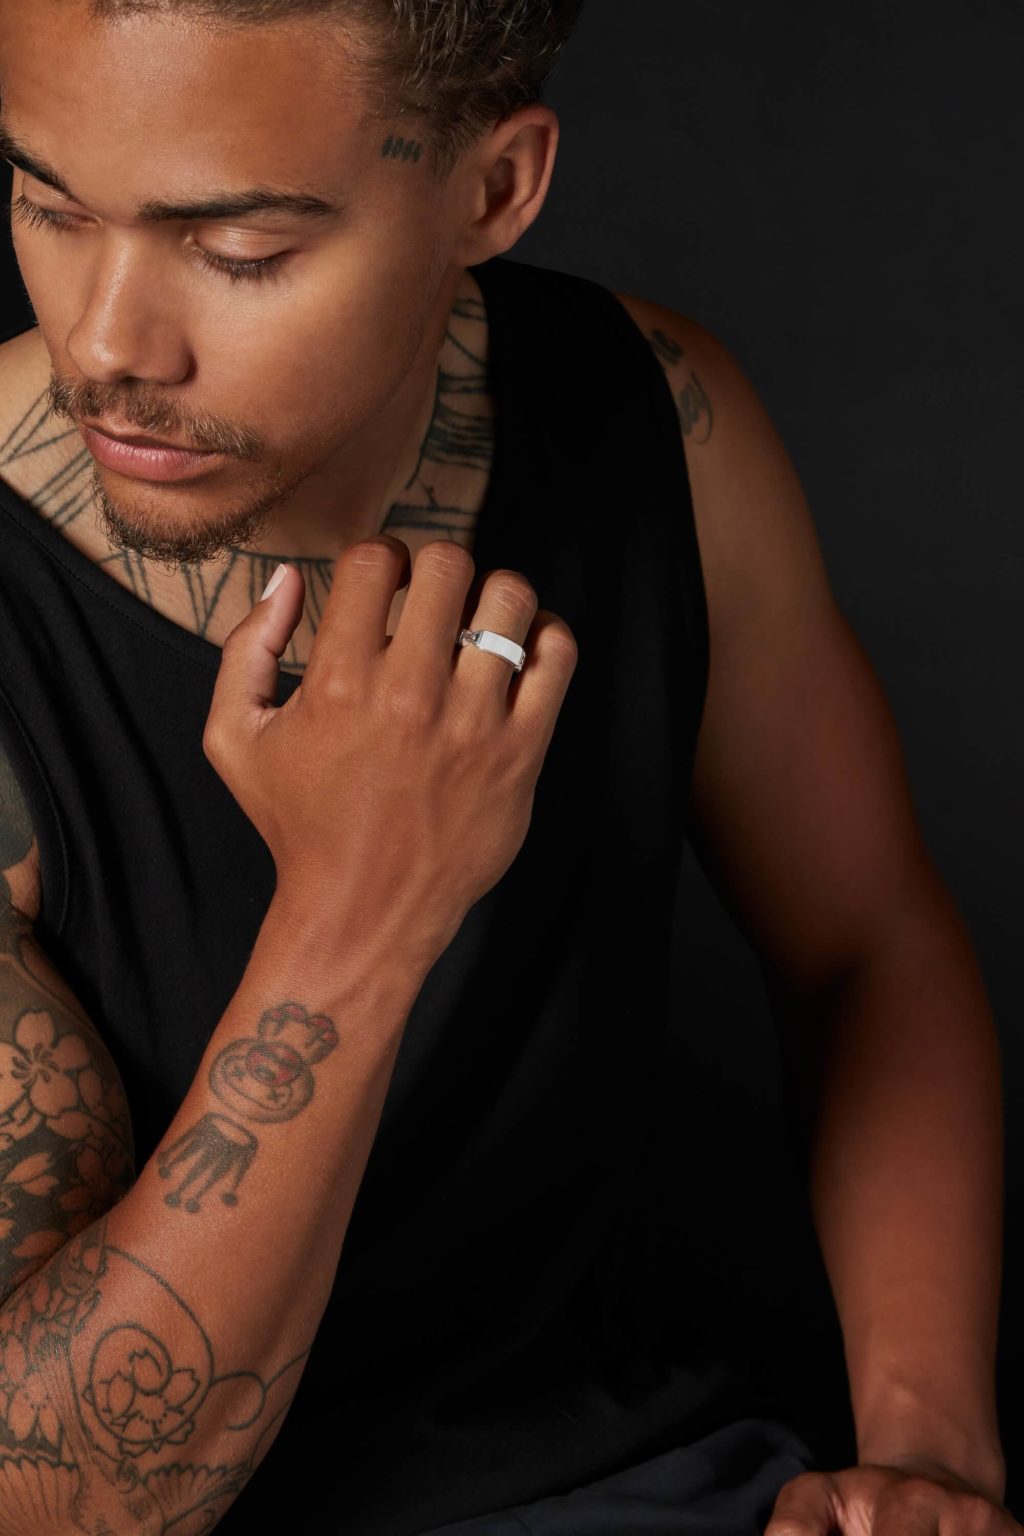 A male model showing tattos on hands and a ring on his finger